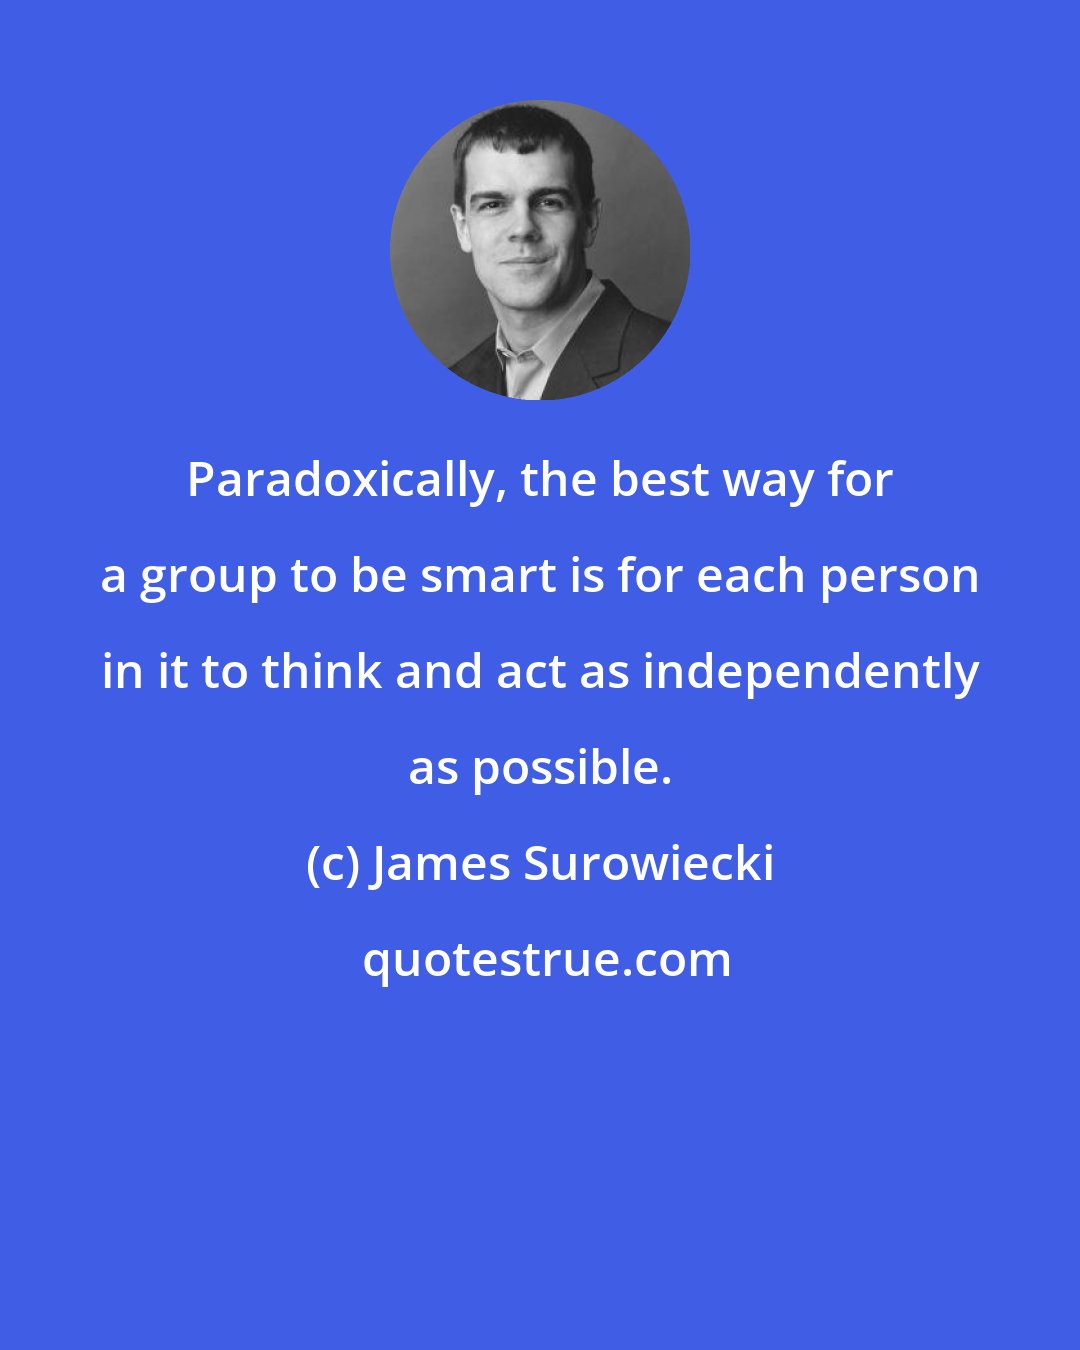 James Surowiecki: Paradoxically, the best way for a group to be smart is for each person in it to think and act as independently as possible.